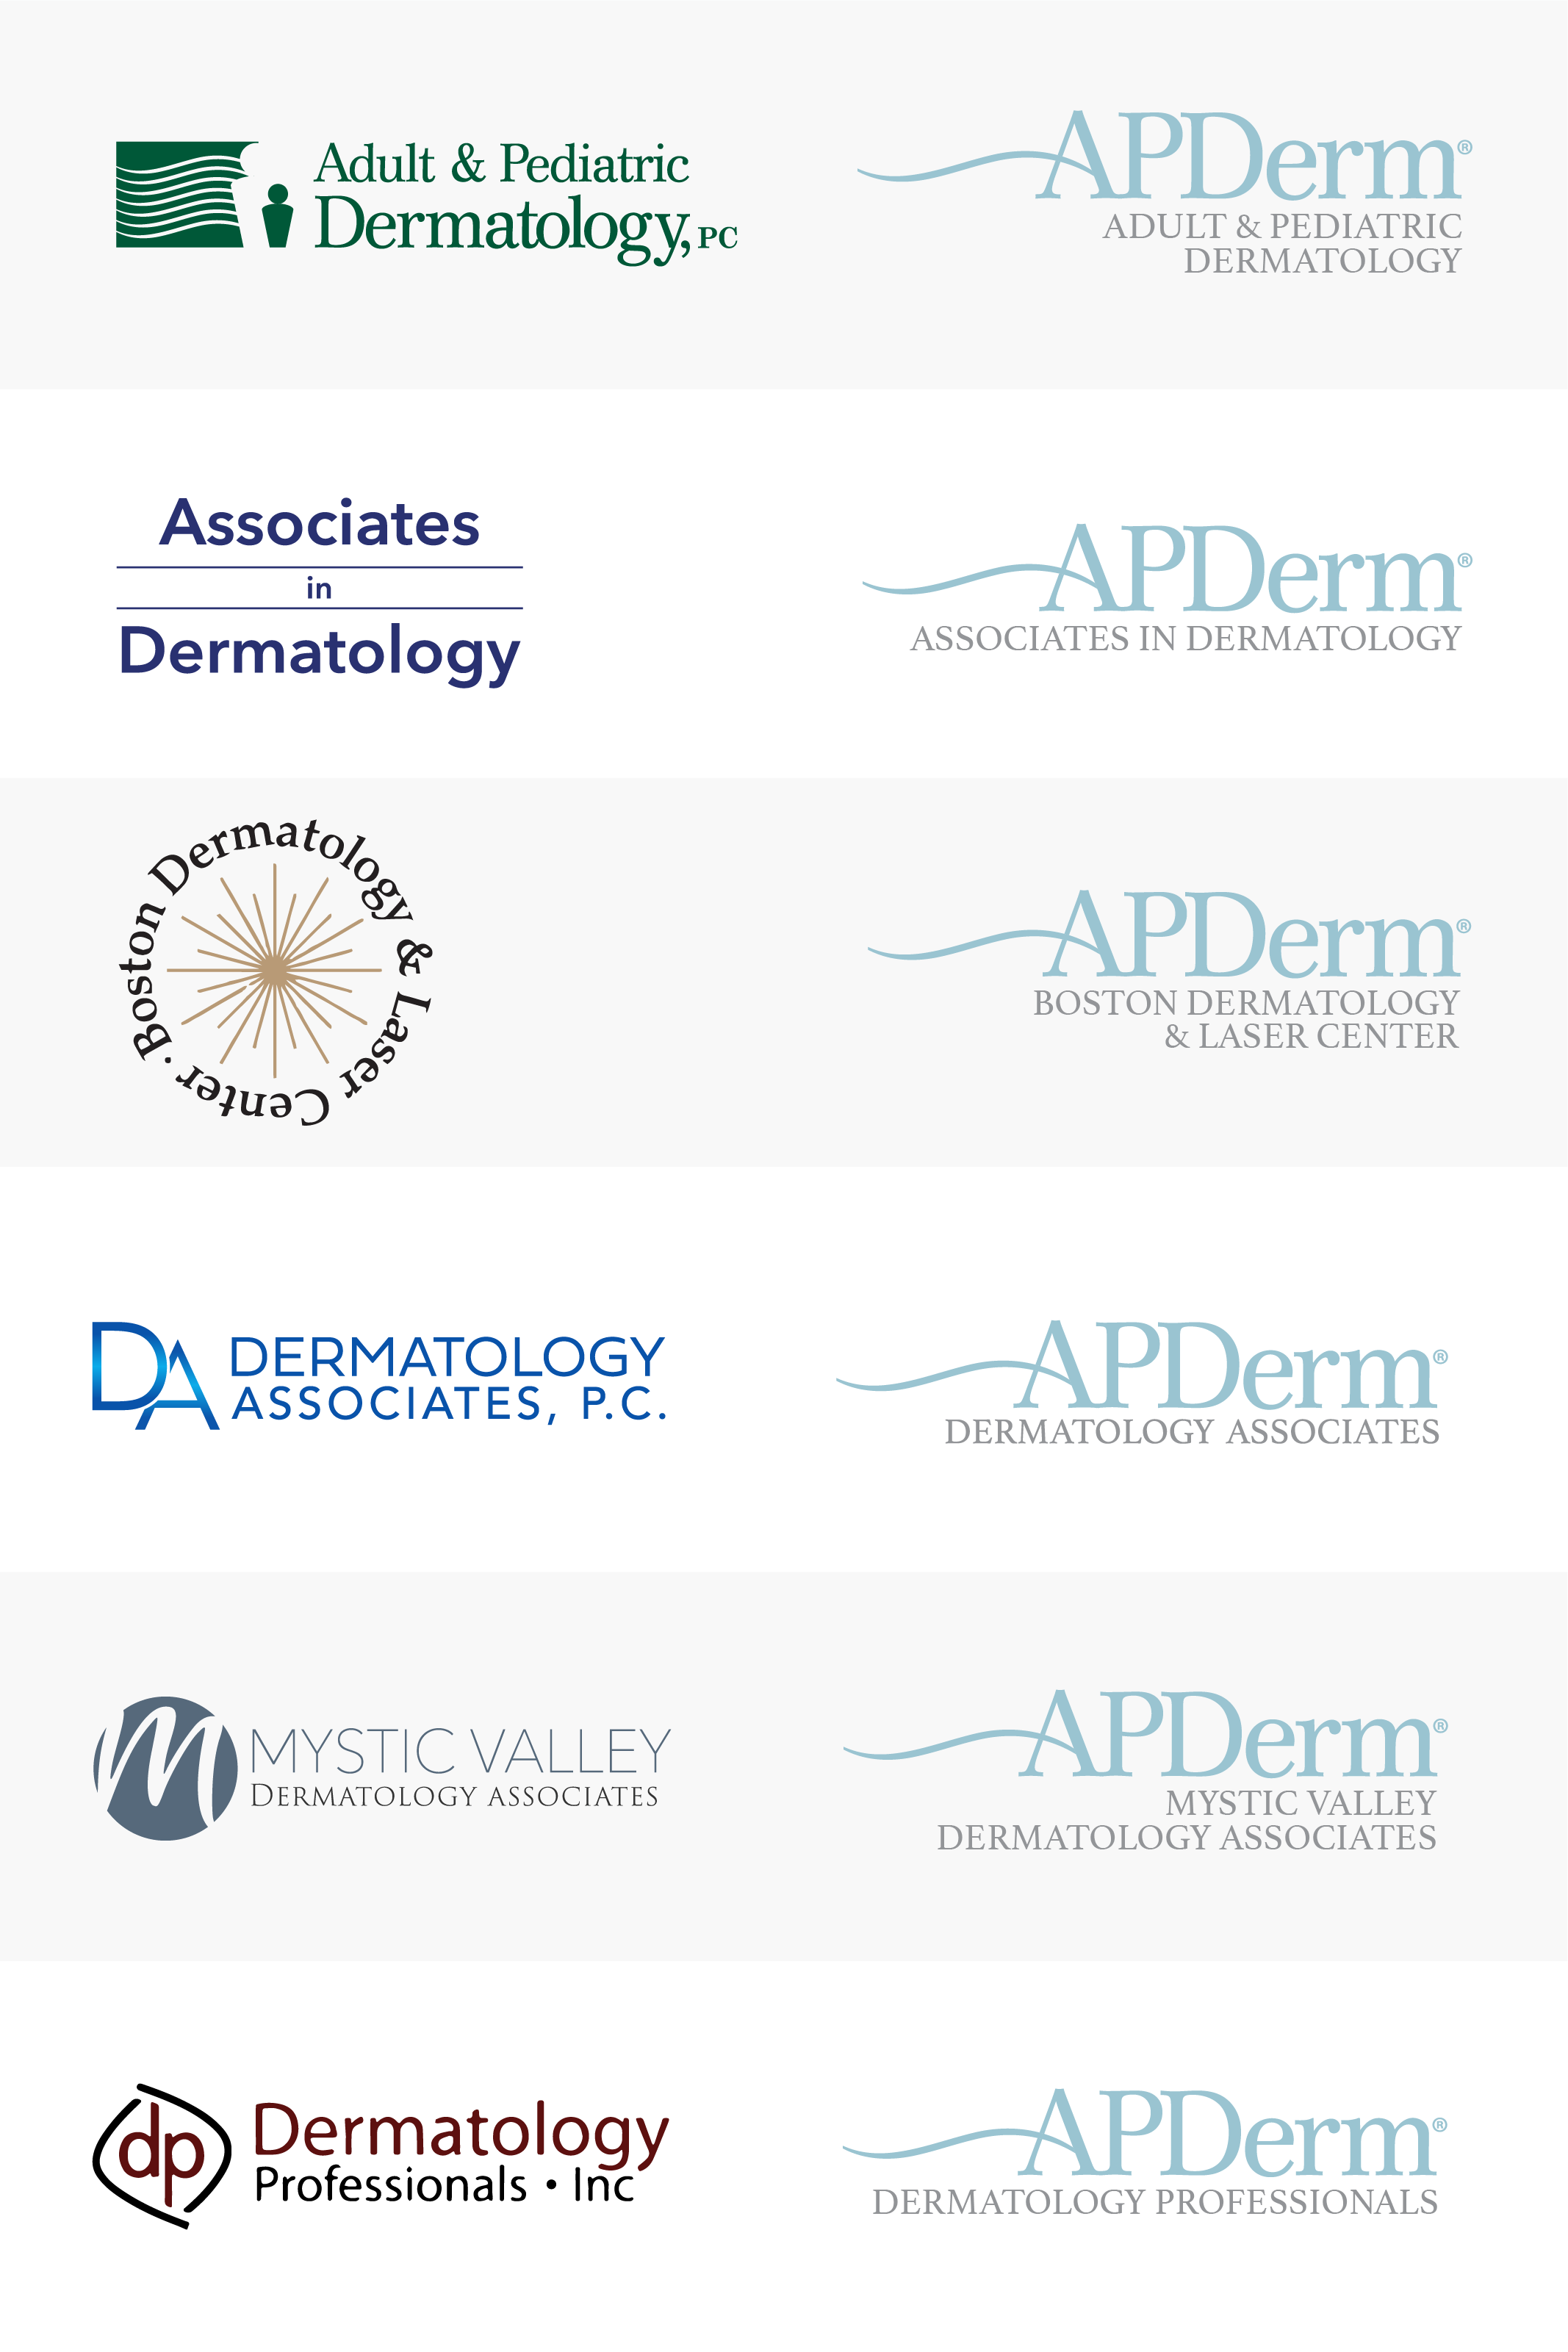 AP Derm before and after logos